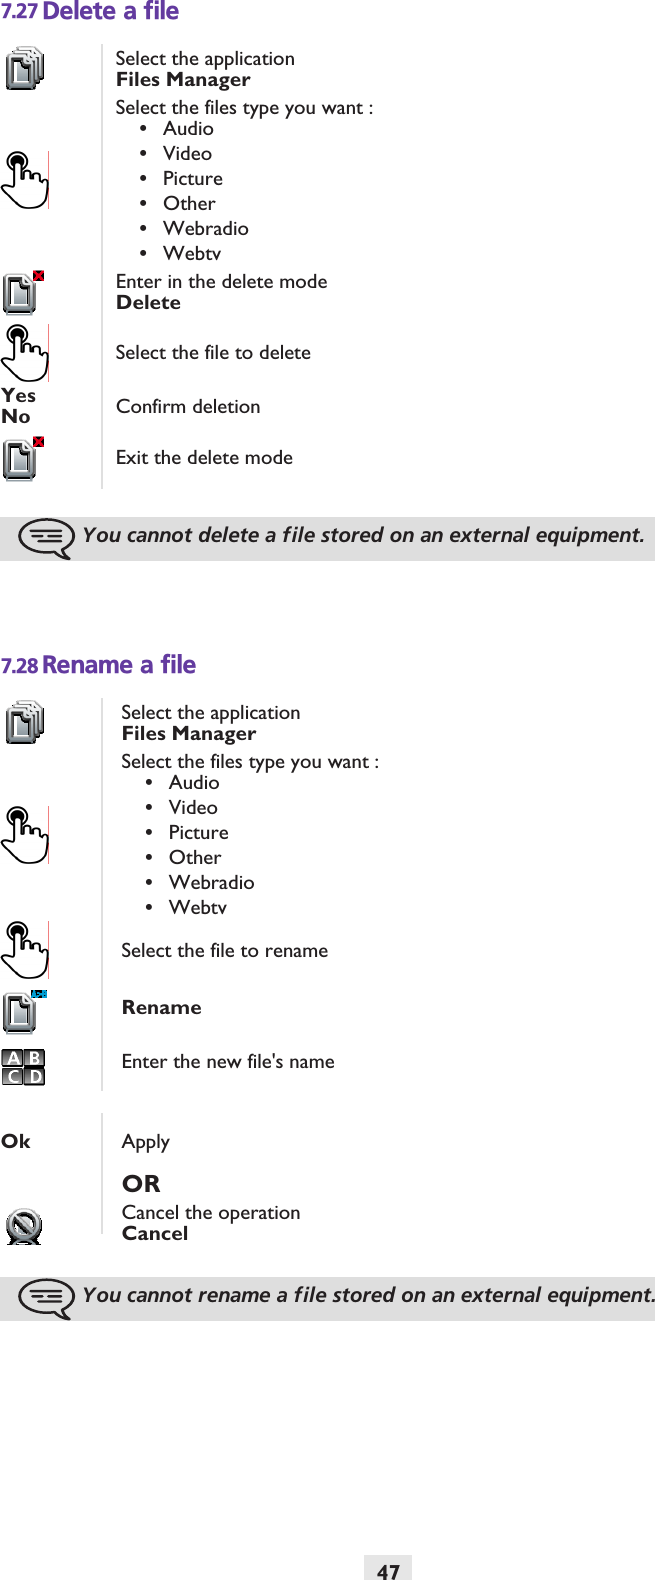 477.27 Delete a file7.28 Rename a fileSelect the applicationFiles ManagerSelect the files type you want :•Audio•Video•Picture•Other•Webradio•WebtvEnter in the delete modeDeleteSelect the file to deleteYesNo Confirm deletionExit the delete modeYou cannot delete a file stored on an external equipment.Select the applicationFiles ManagerSelect the files type you want :•Audio•Video•Picture•Other•Webradio•WebtvSelect the file to renameRenameEnter the new file&apos;s nameOk ApplyORCancel the operationCancelYou cannot rename a file stored on an external equipment.